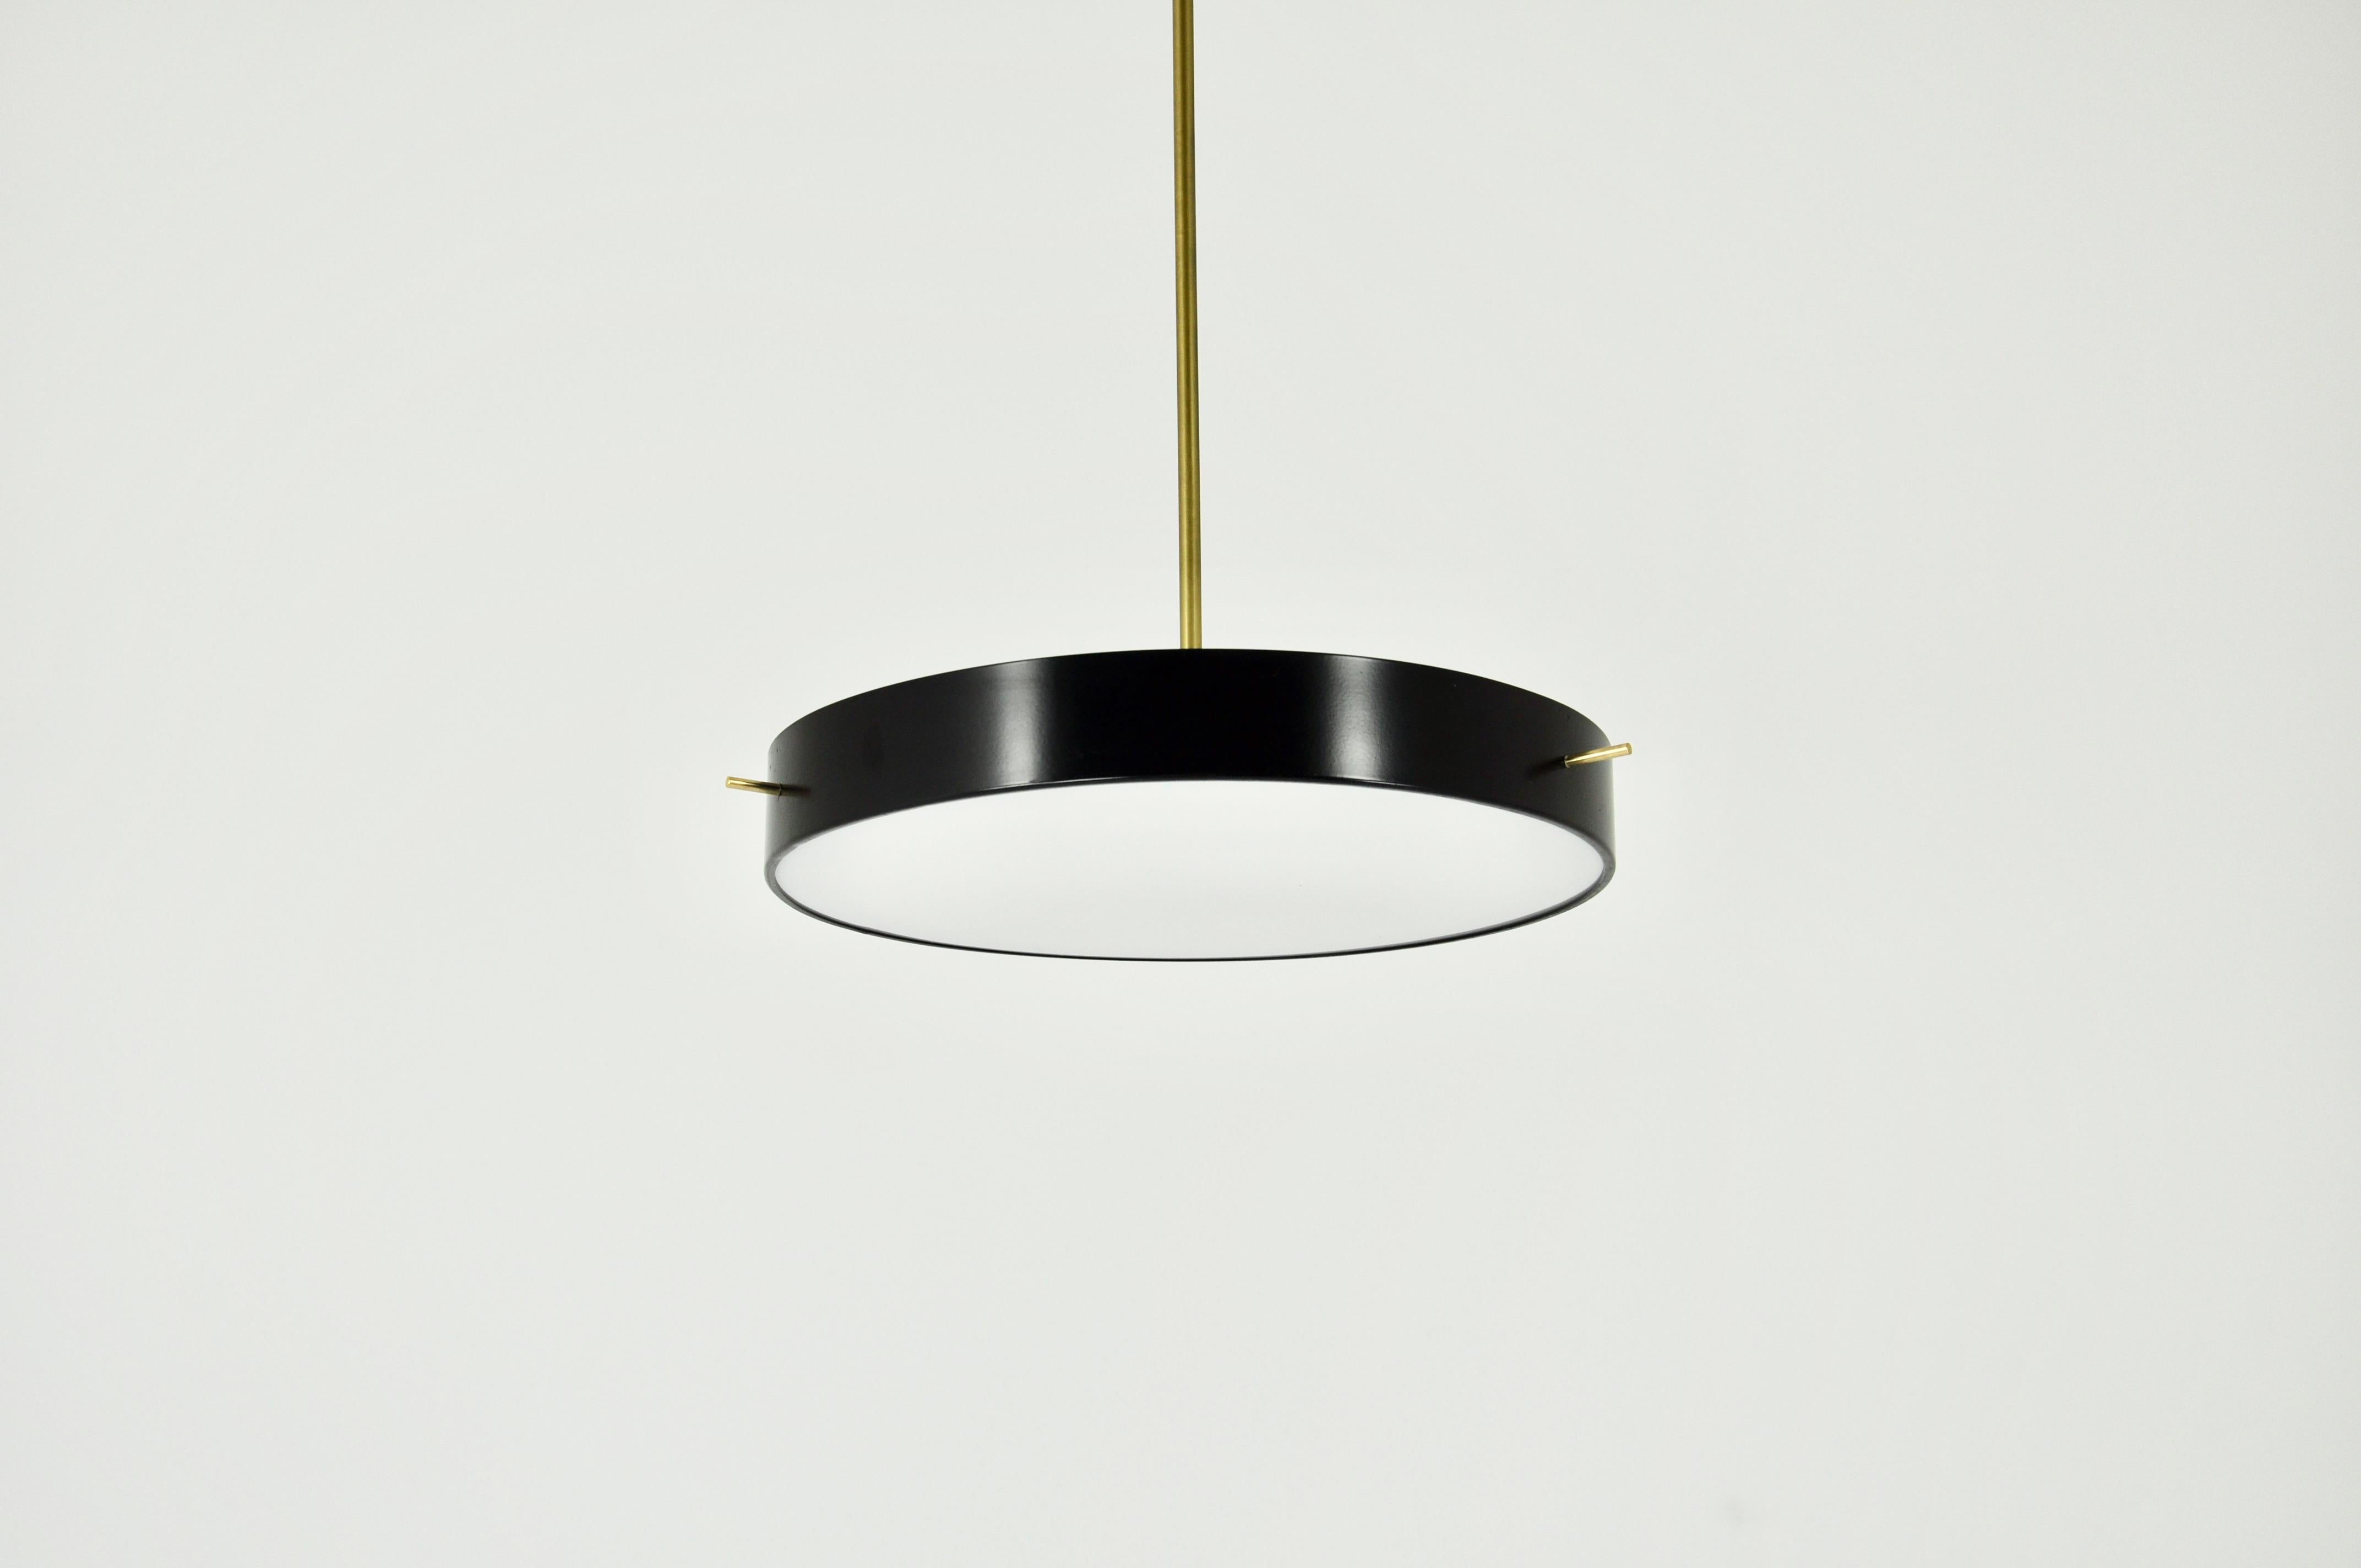 Ceiling lamp in black aluminium and glass. Wear due to age and time,